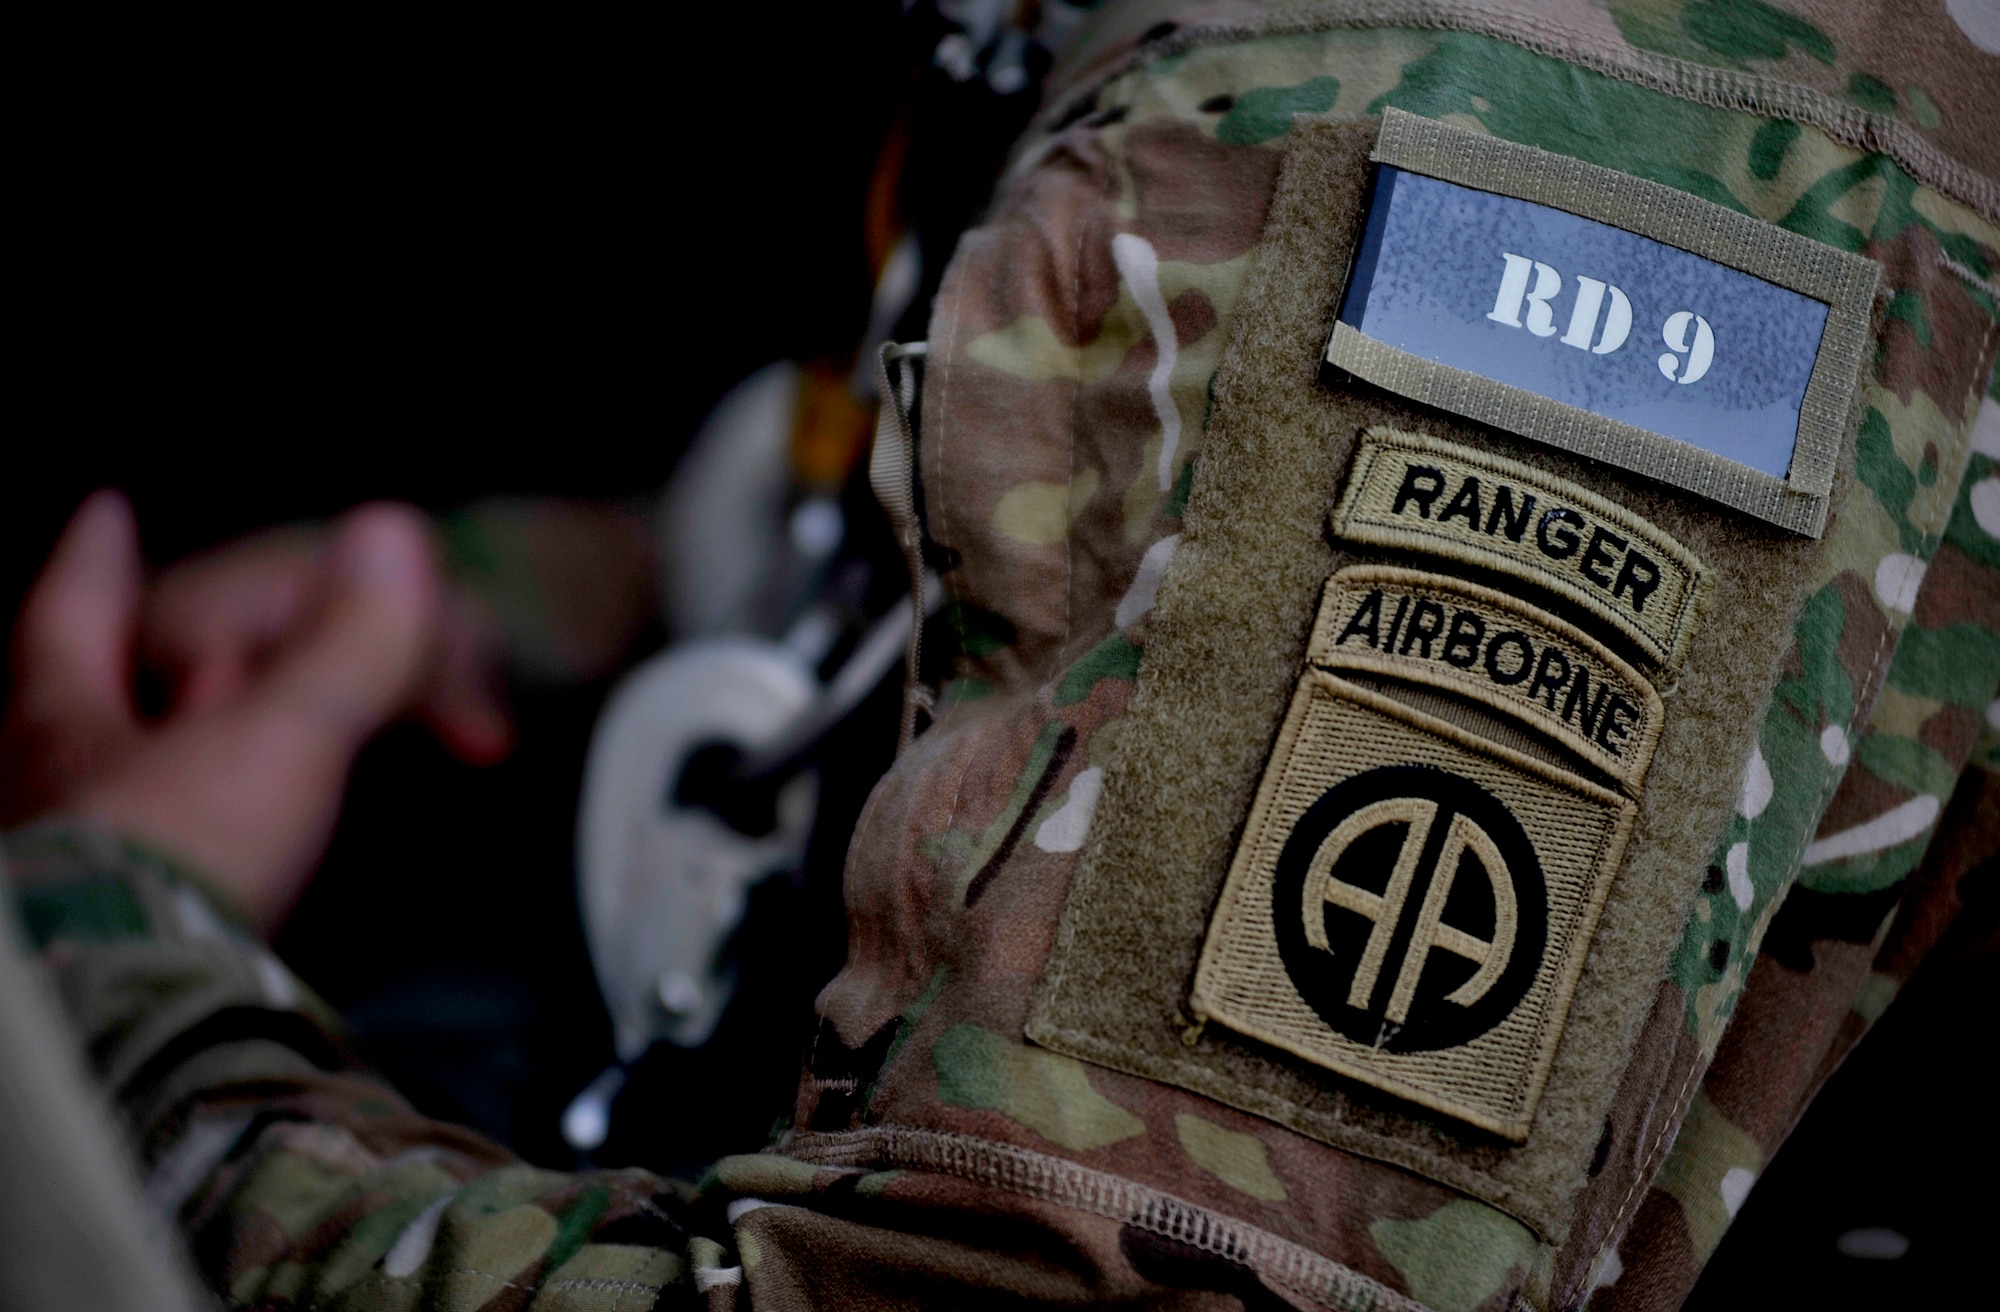 Up close view of 82nd Airborne Division patches on a uniform